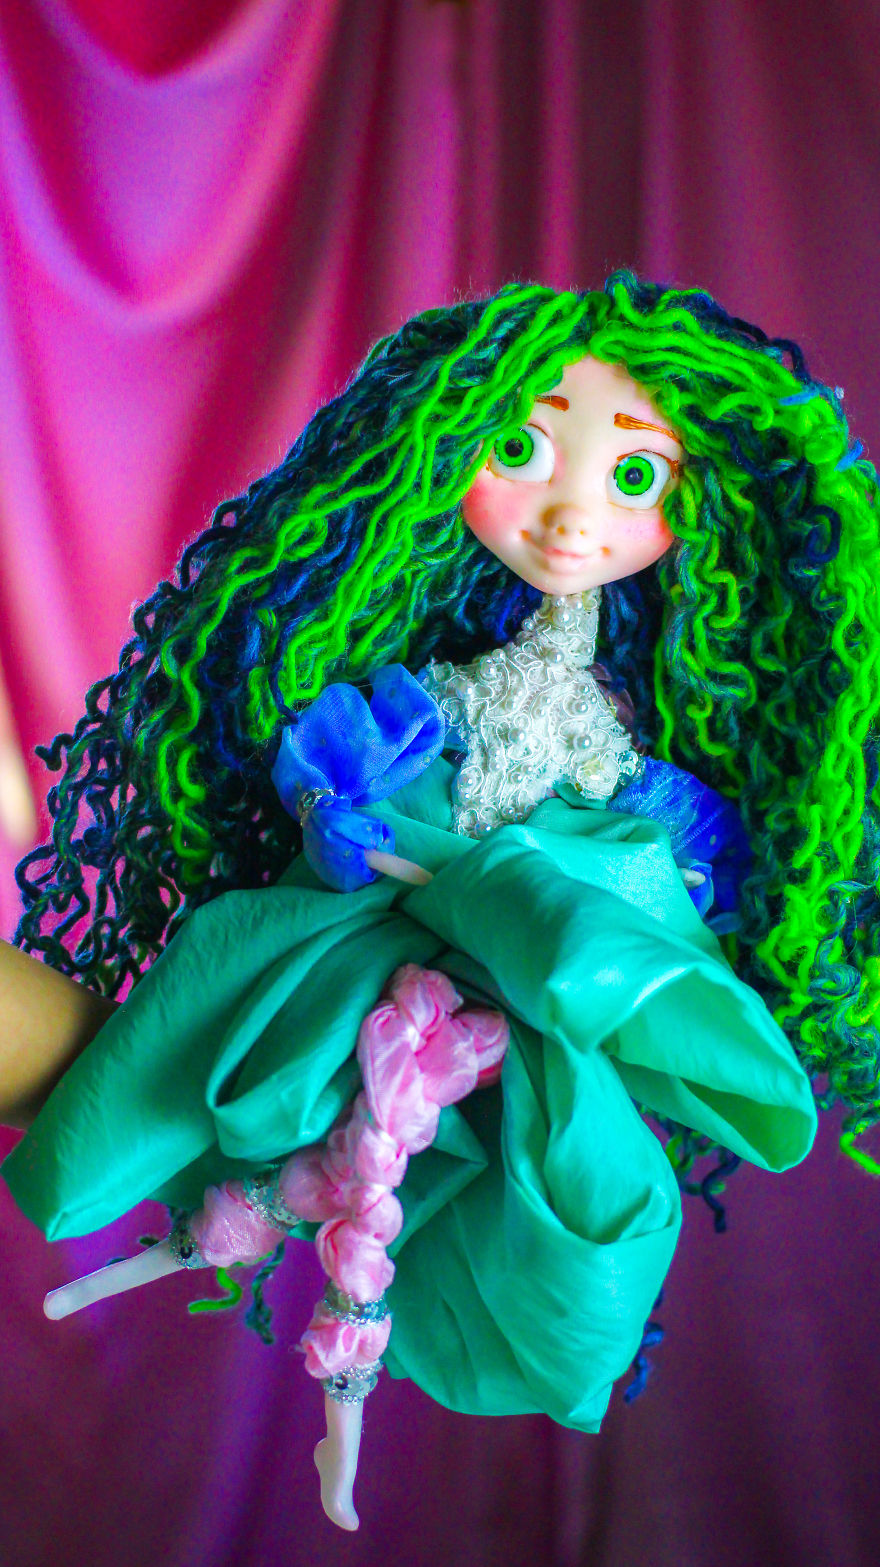 I Make Fairy Handmade Dolls Sculpted With Polymer Clay - Unique Artist Dolls Keepers Of Magic